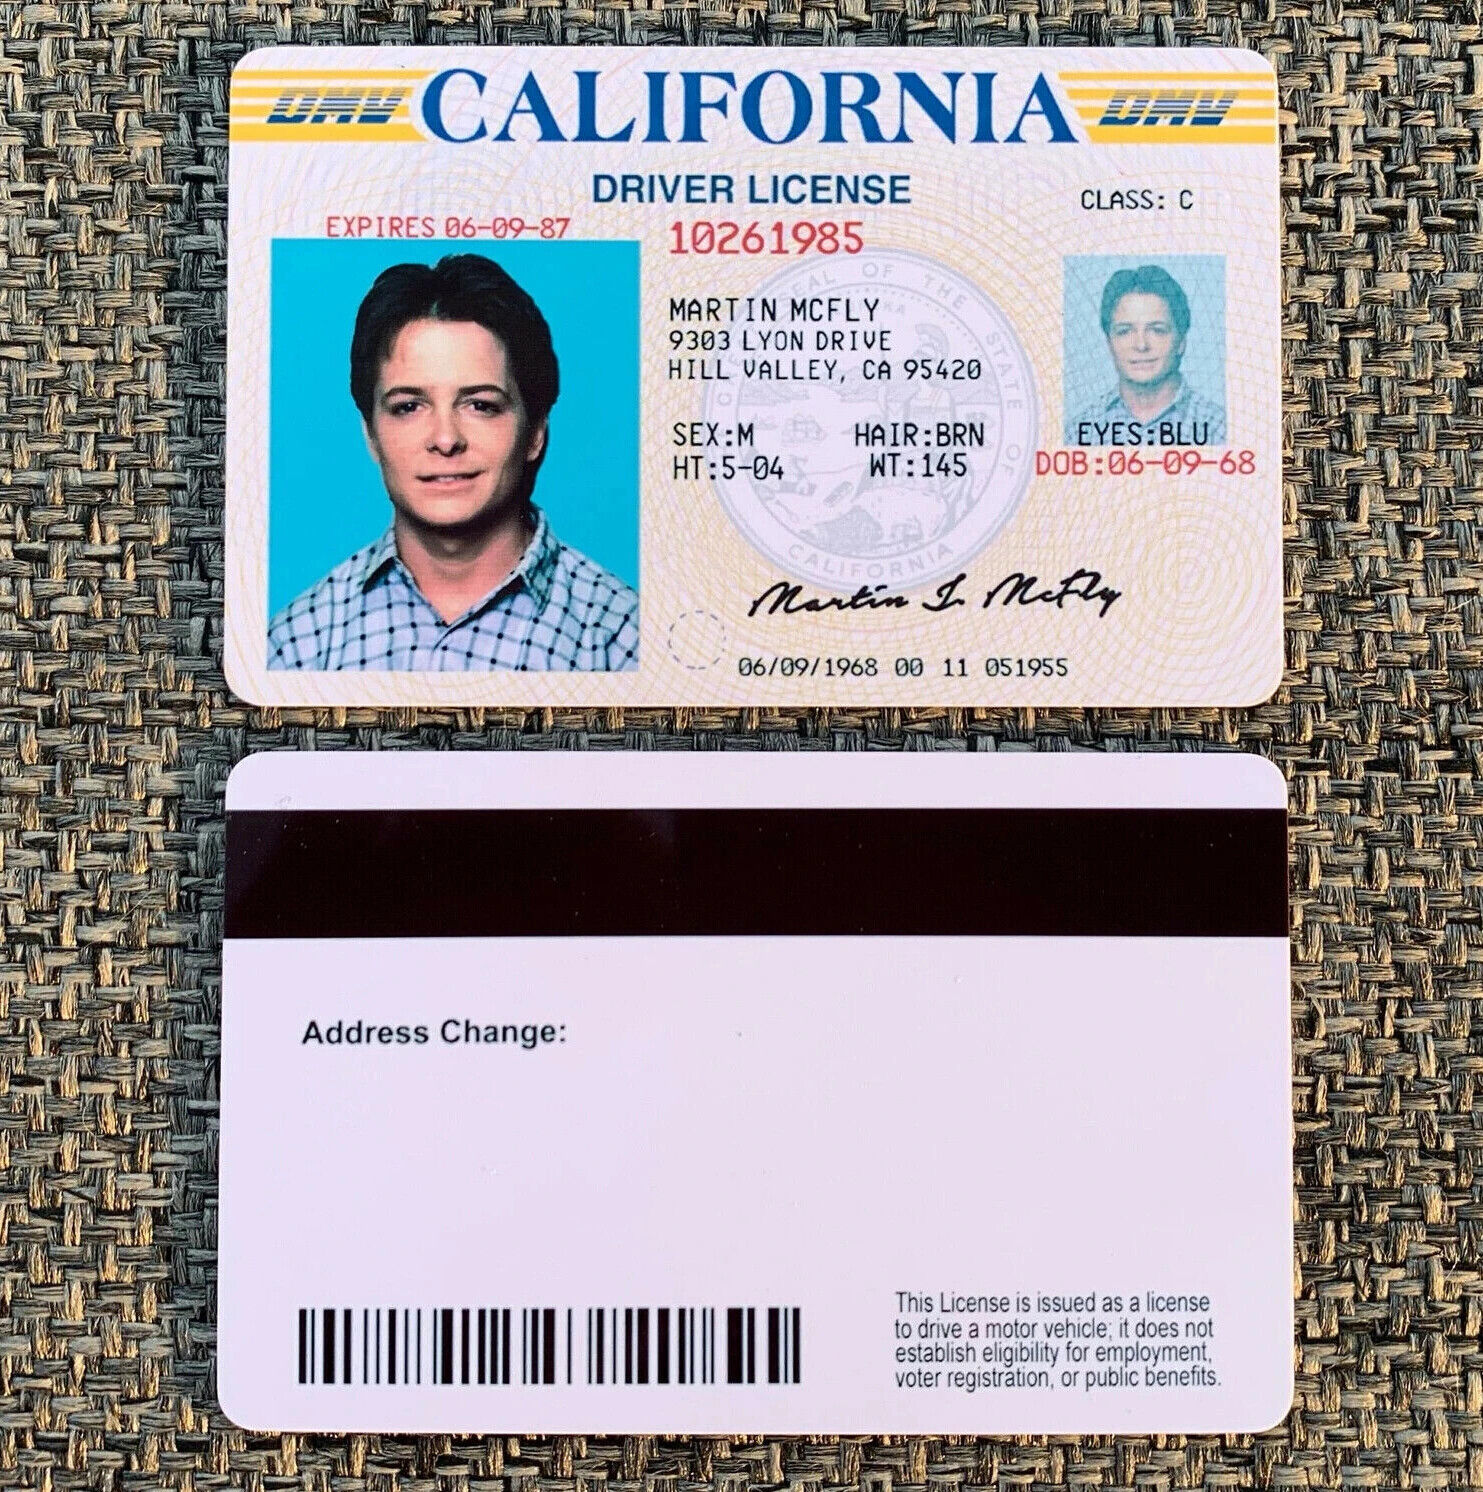 Marty McFly ID CARD - Back to the Future - Michael J Fox - License - Prop  Mc FLY | eBay